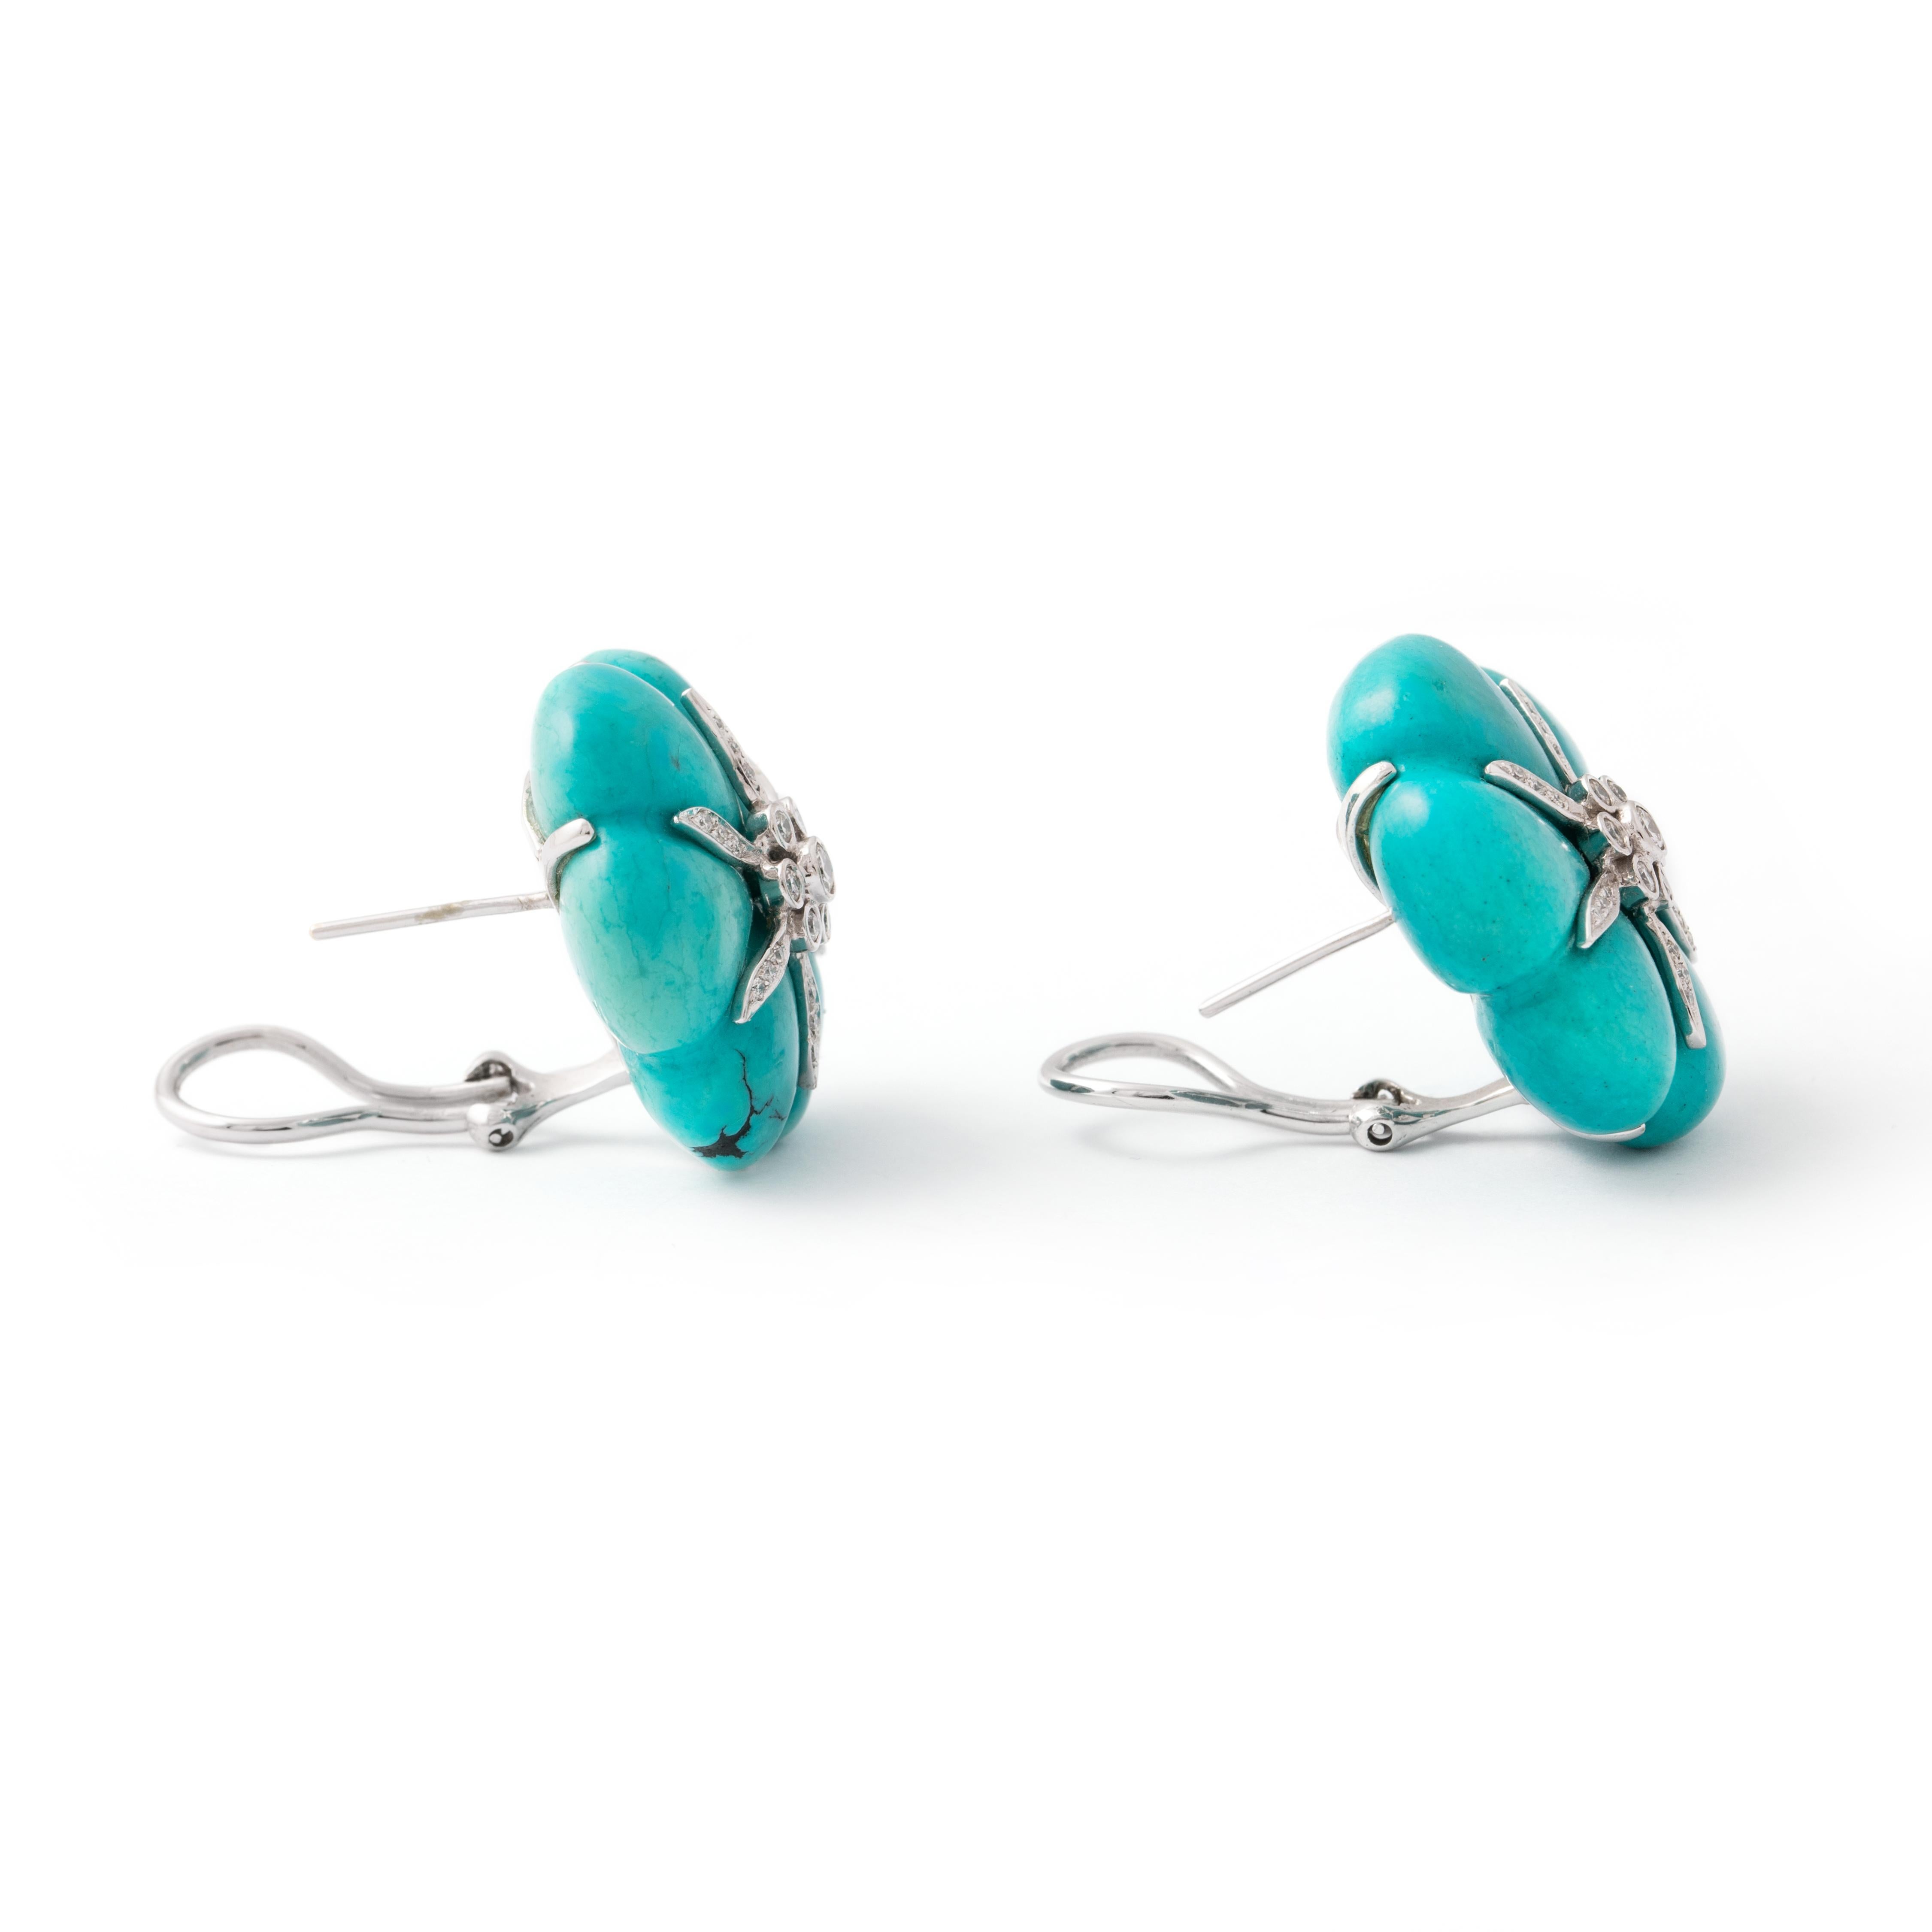 Natural Turquoise diamond and white gold earrings.

Total height: approx. 2.50 centimeters.
Total width: approx. 2.50 centimeters.

Total weight: 19.01 grams.
